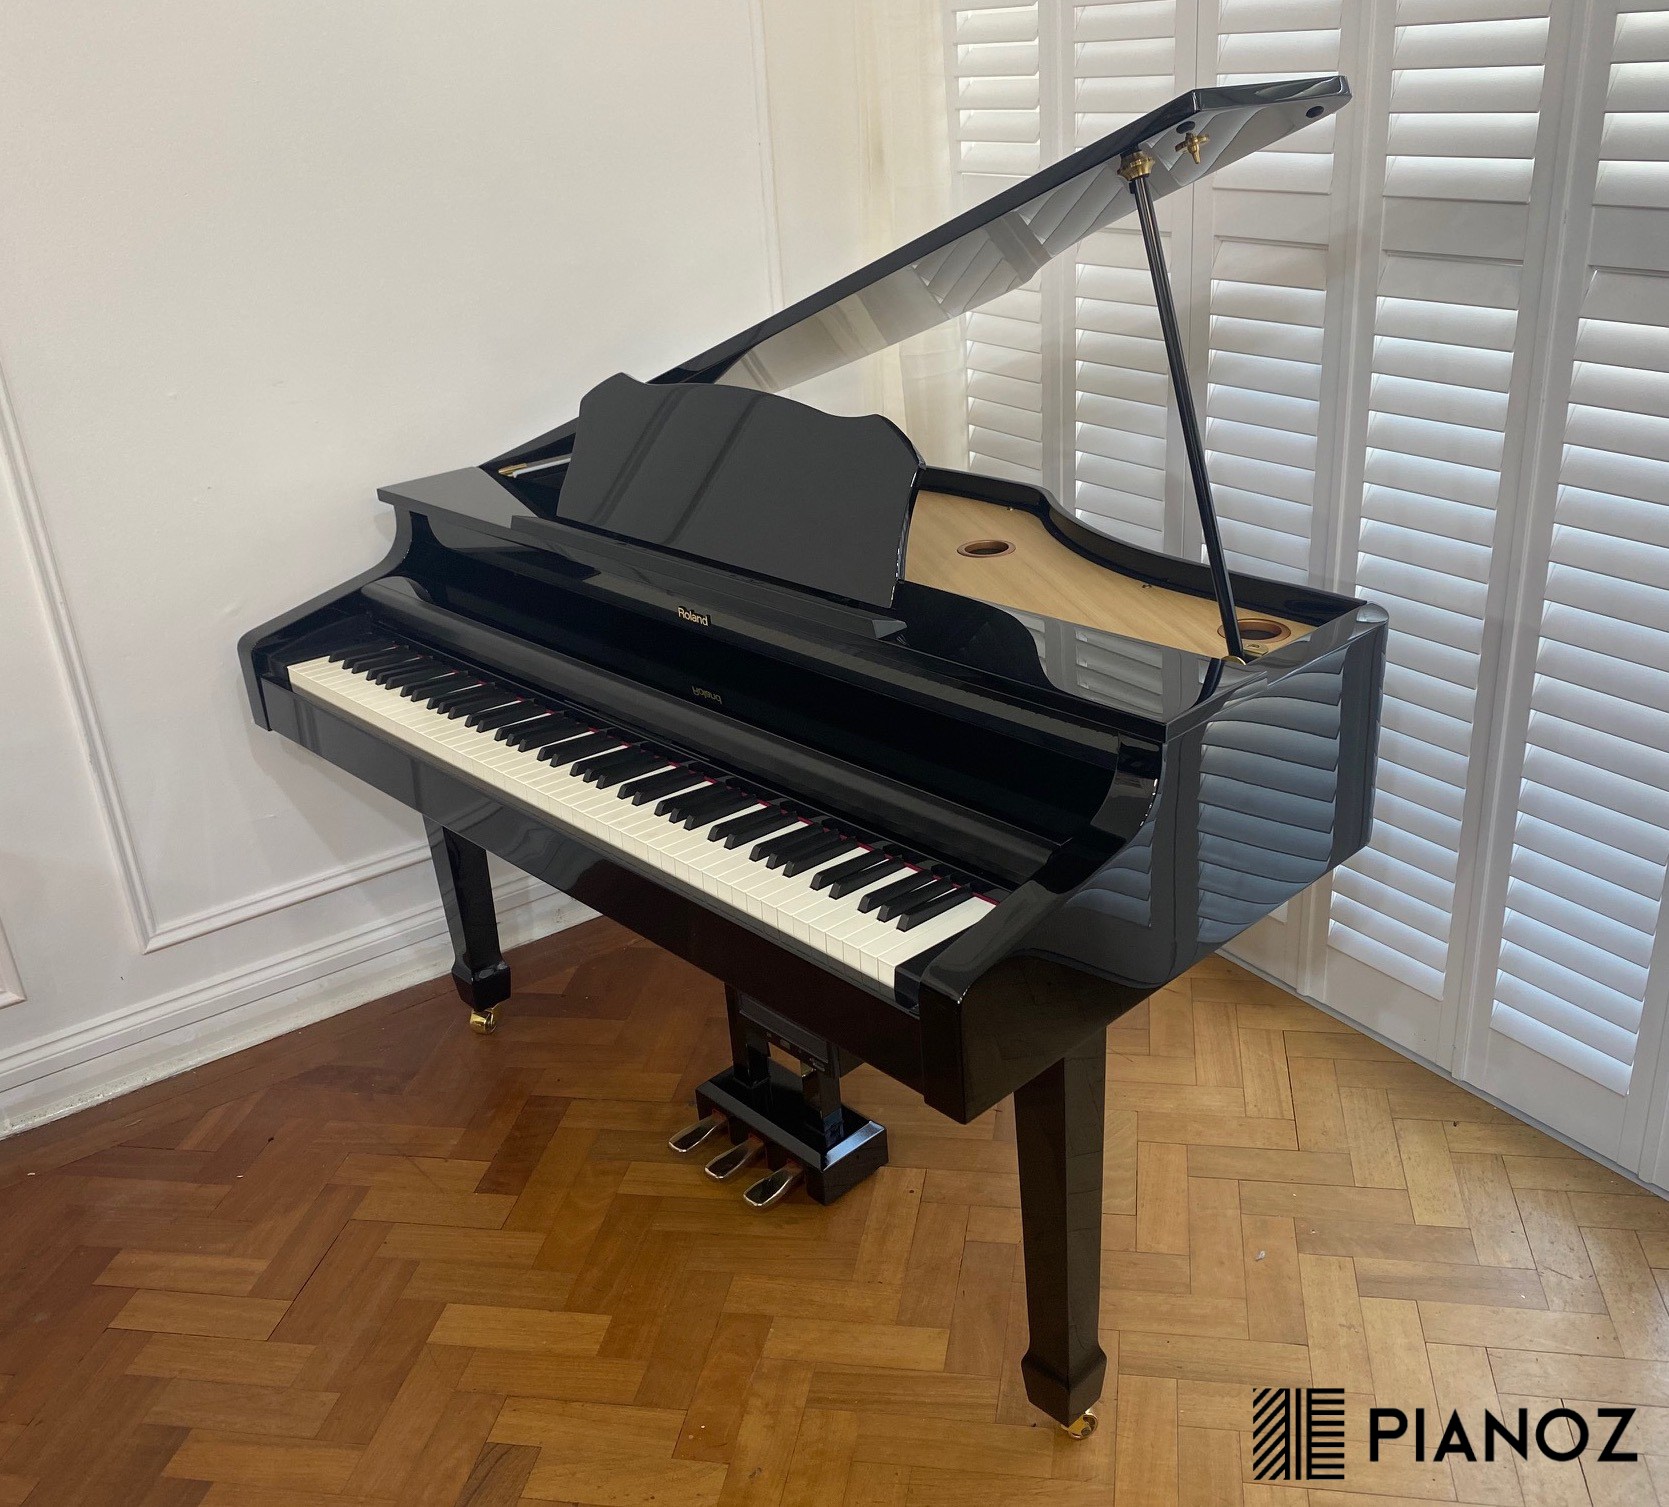 Roland Self Playing Moving Keys Digital Piano piano for sale in UK